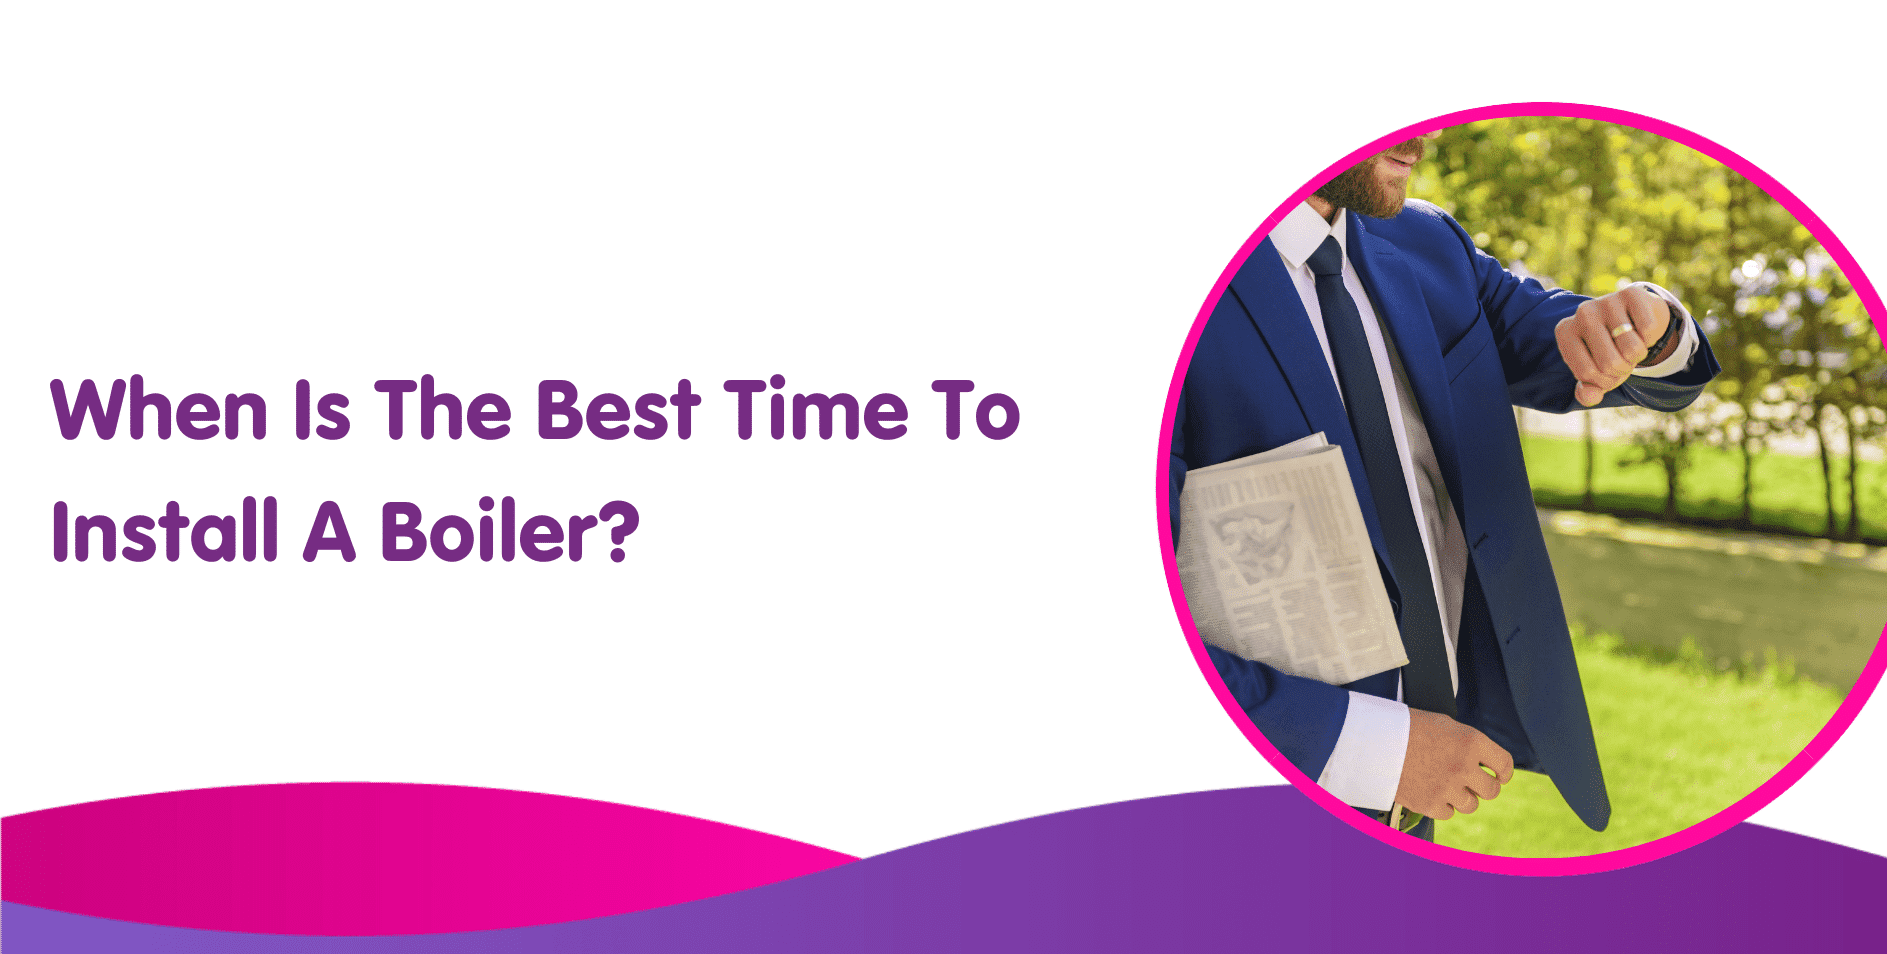 When Is The Best Time To Install A Boiler?